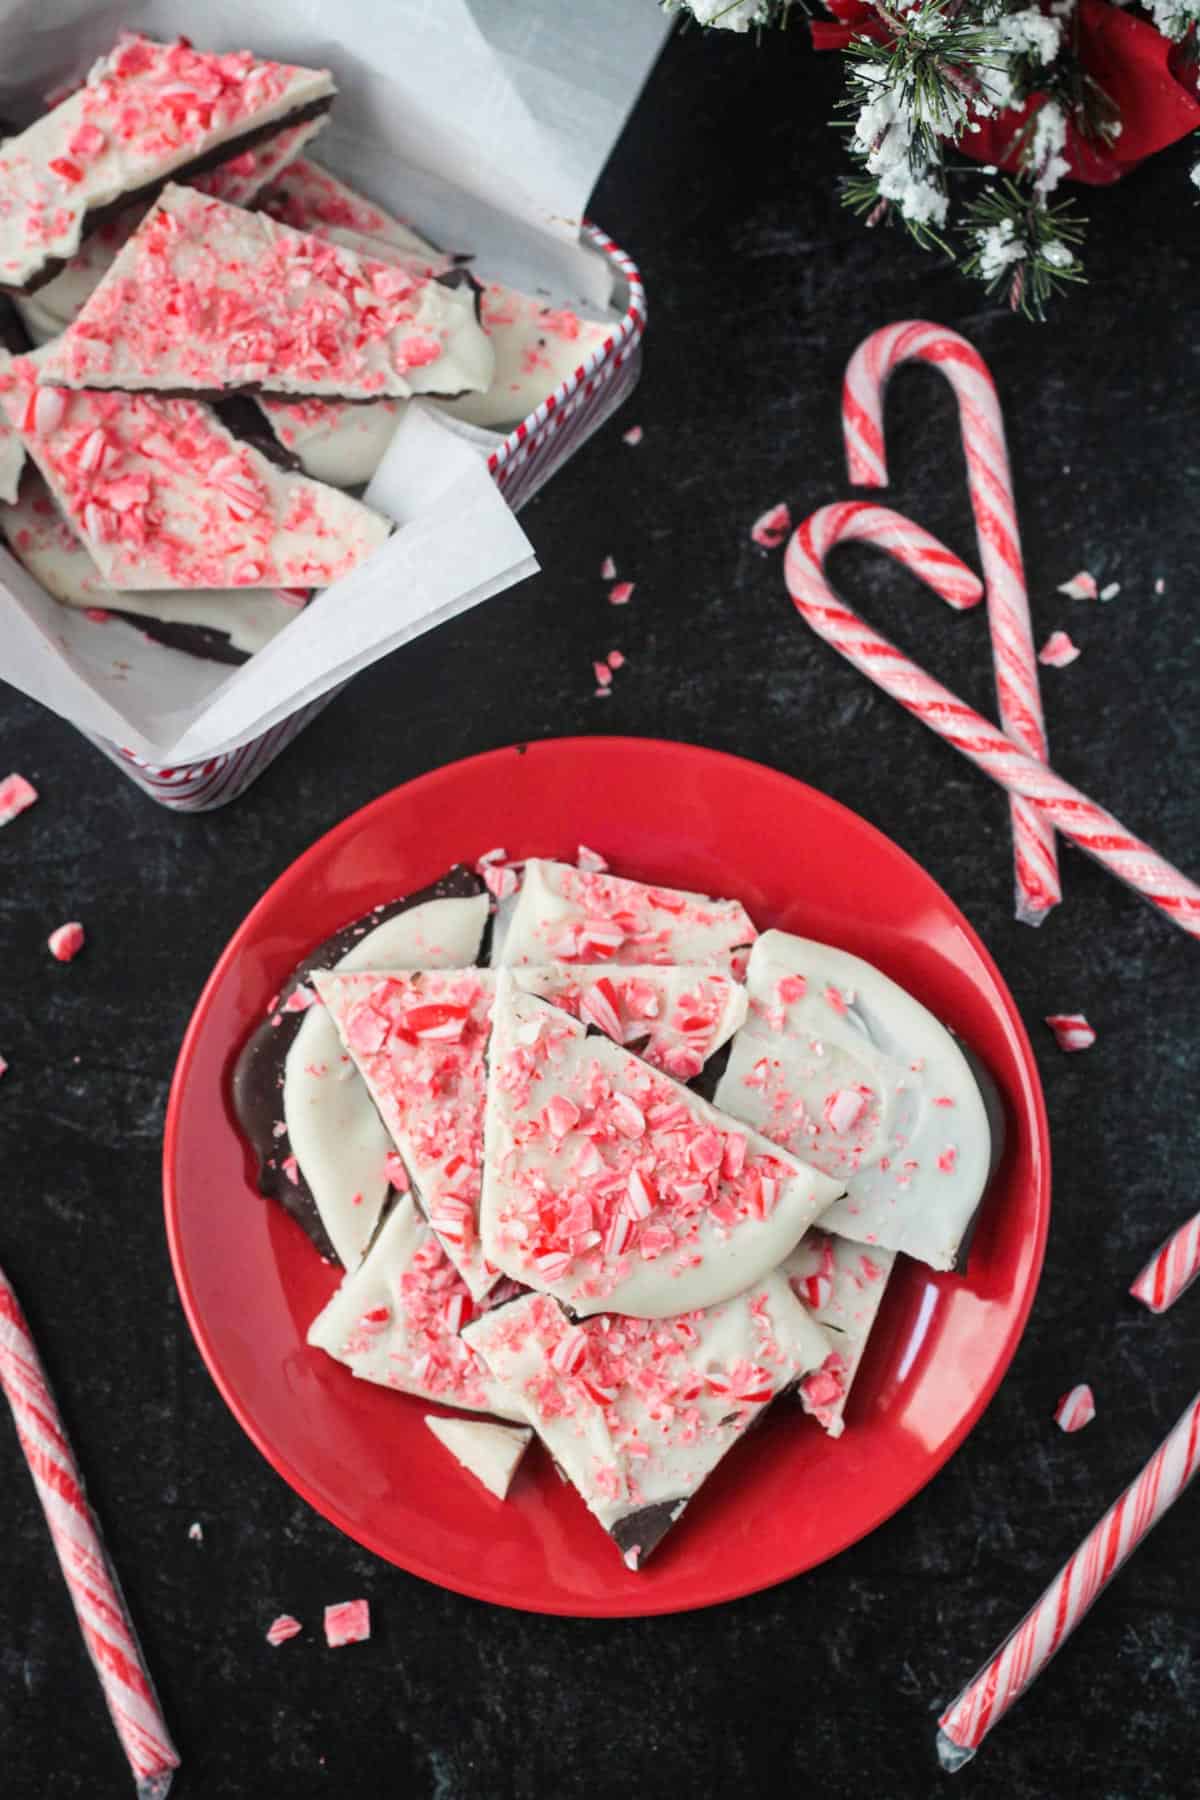 Vegan peppermint bark on a red plate surrounded by candy canes.